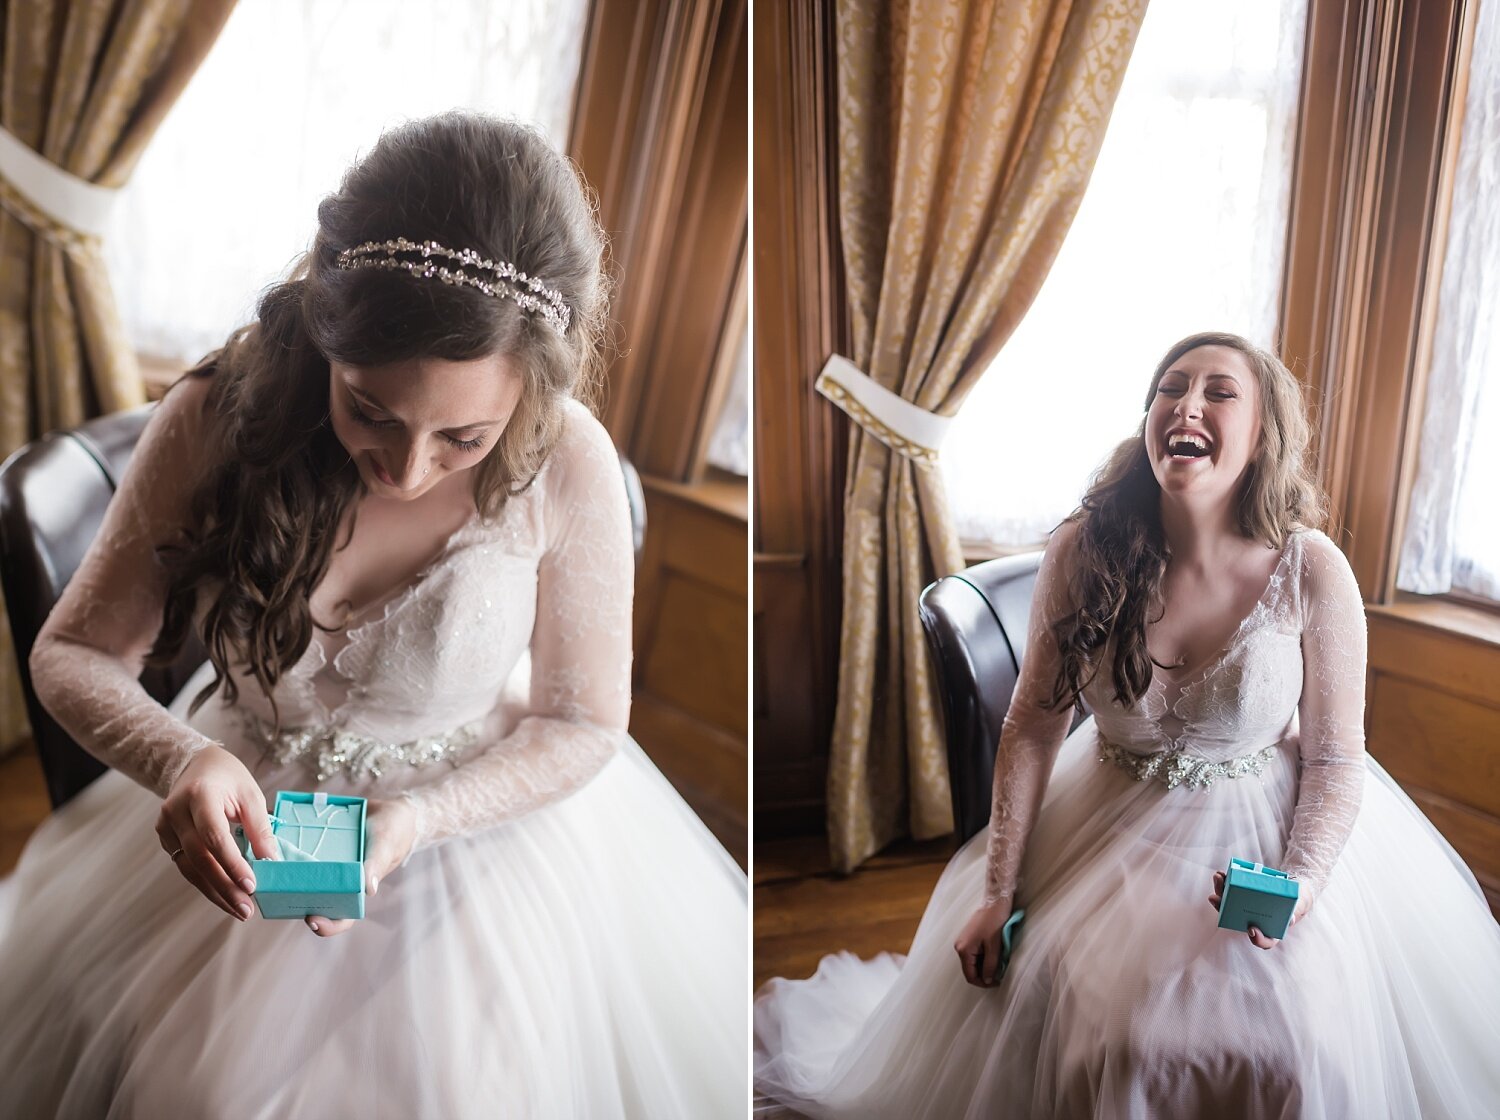  A bride opens up a Tiffany &amp; Co diamond necklace from her fiance in Detroit.  